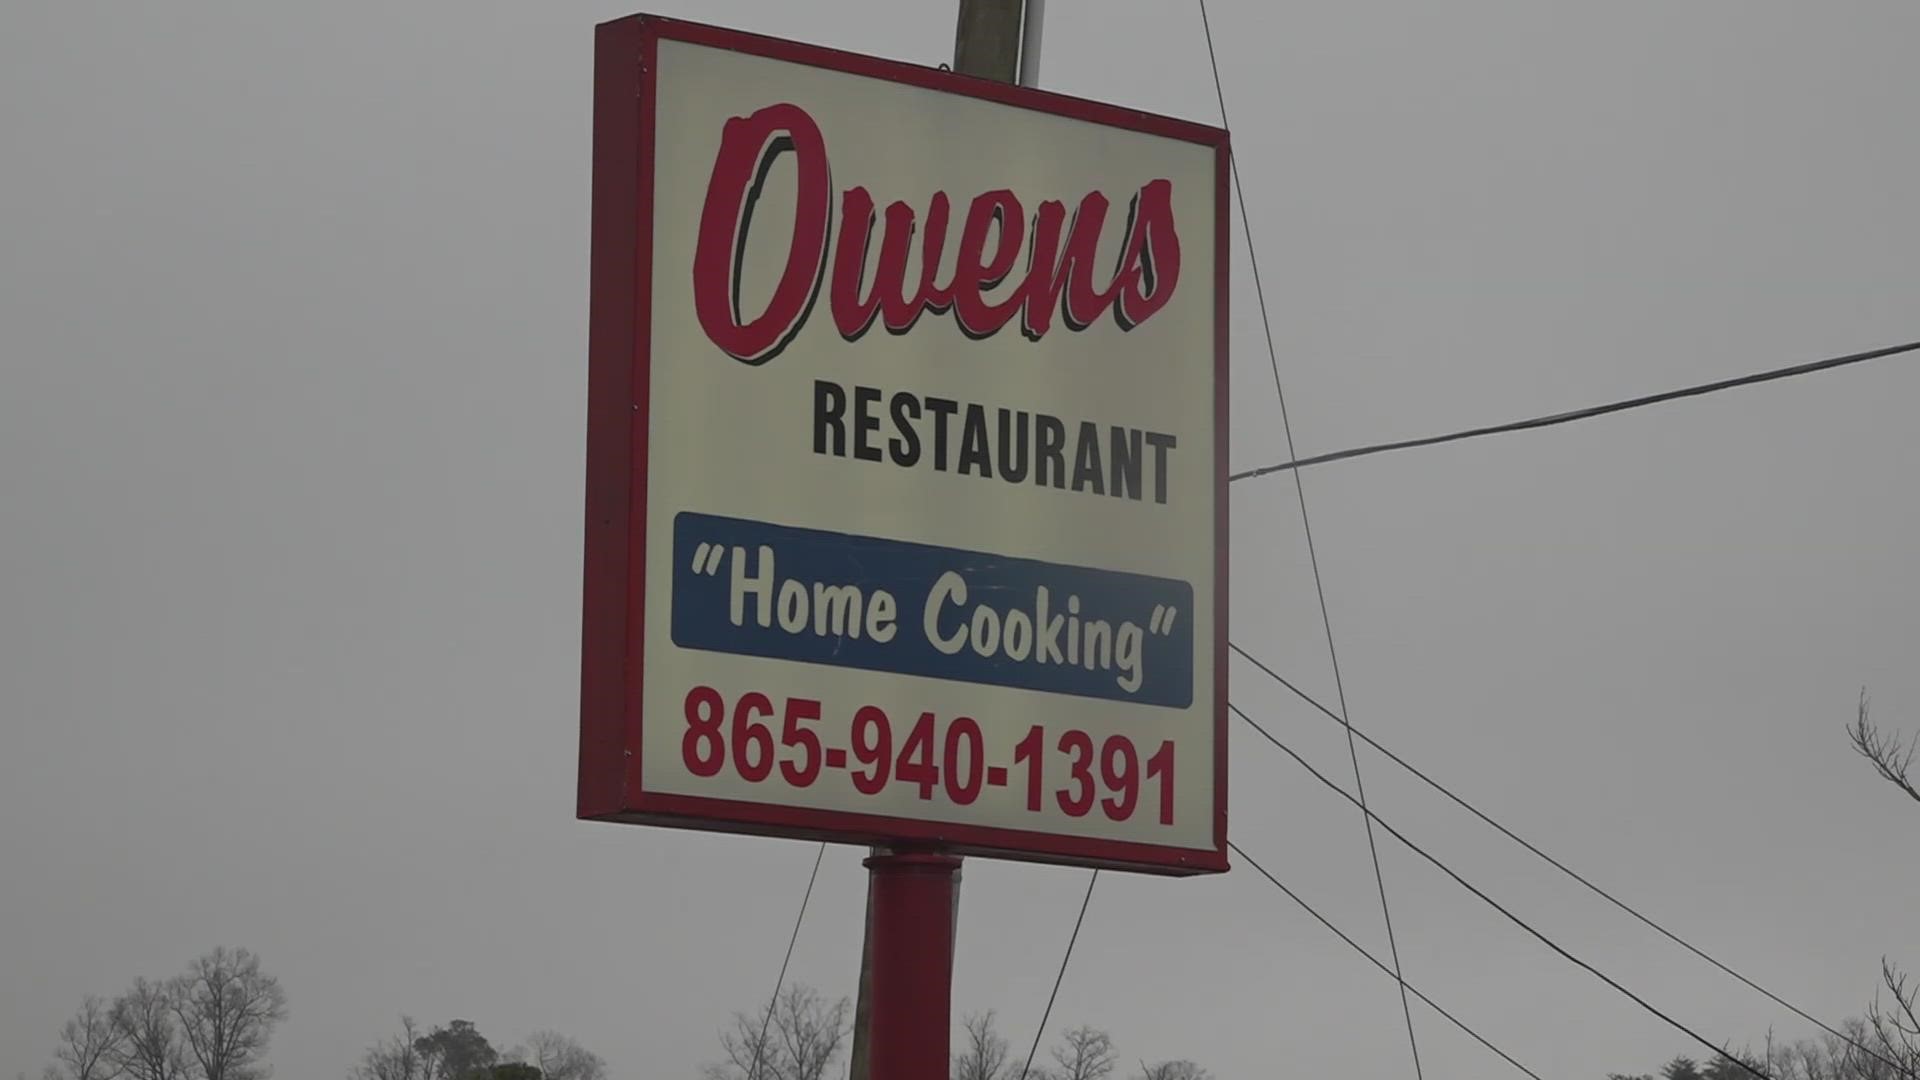 Owens Restaurant hosted a spaghetti fundraiser to help Michael Williams' daughter and her family.